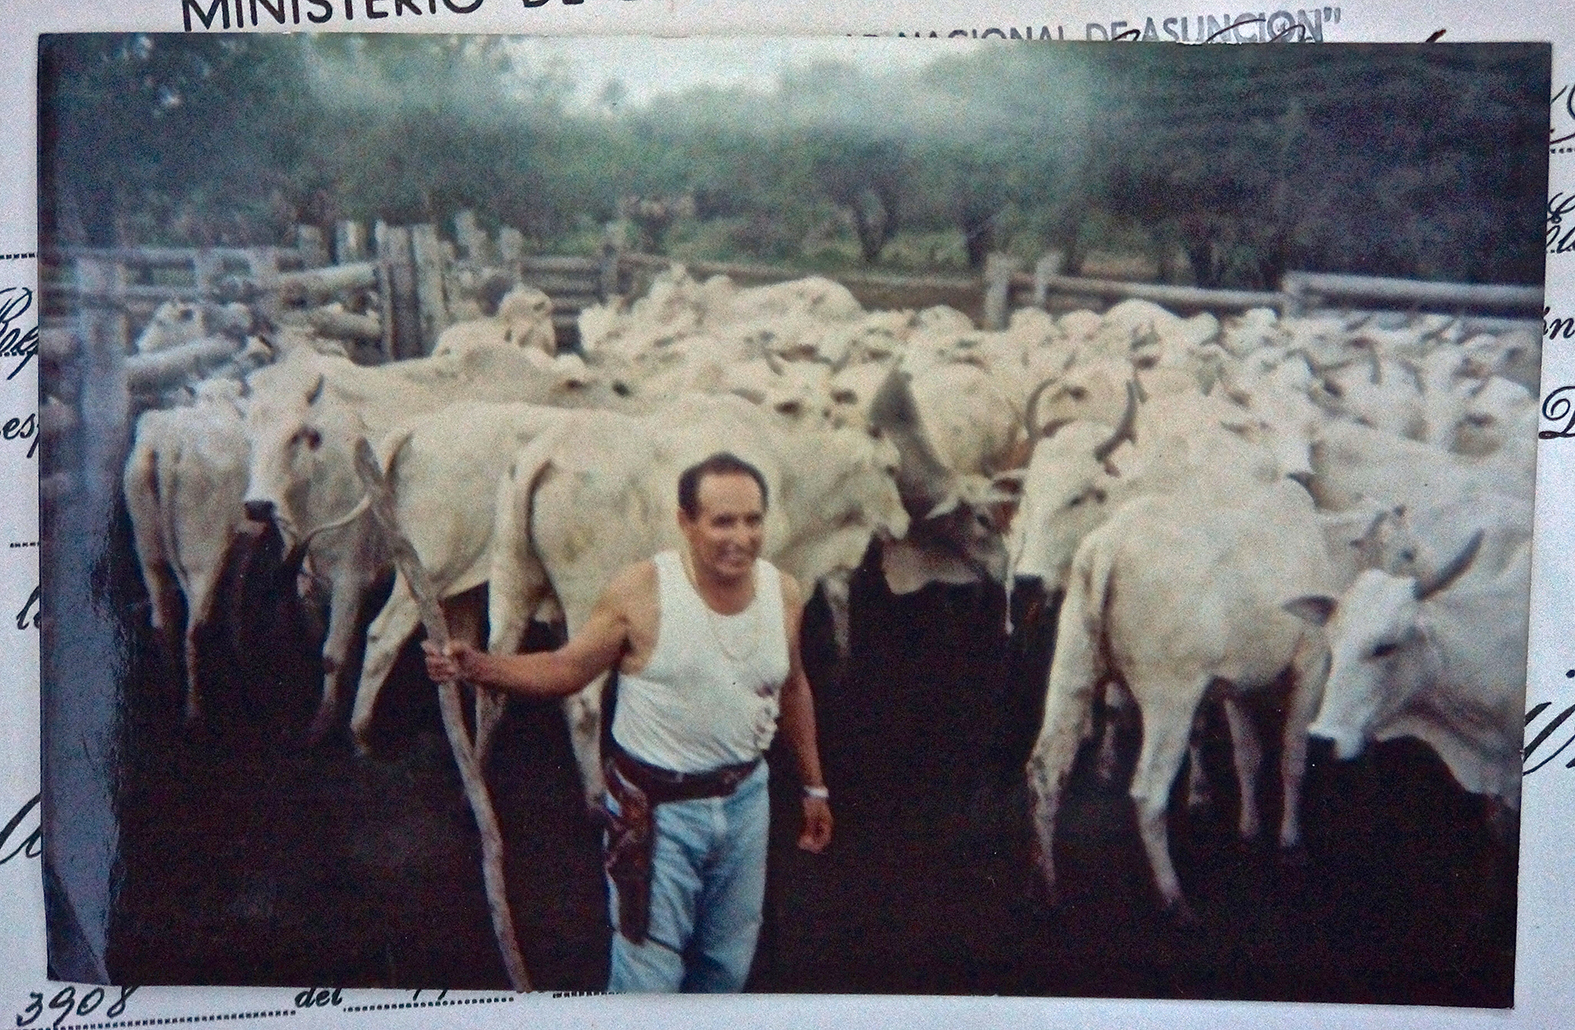 Tarcisio Sostoa and his herd of cattle in the 1990s. Sostoa was leader of the Colorado party in Puerto Casado from the 1960s to the1980s. After the fall of the dictatorship in 1989, he was elected Governor of Alto Paraguay and then parliament member. Source: Tarcisio Sostoa. Picture of the original by the author, 2015.